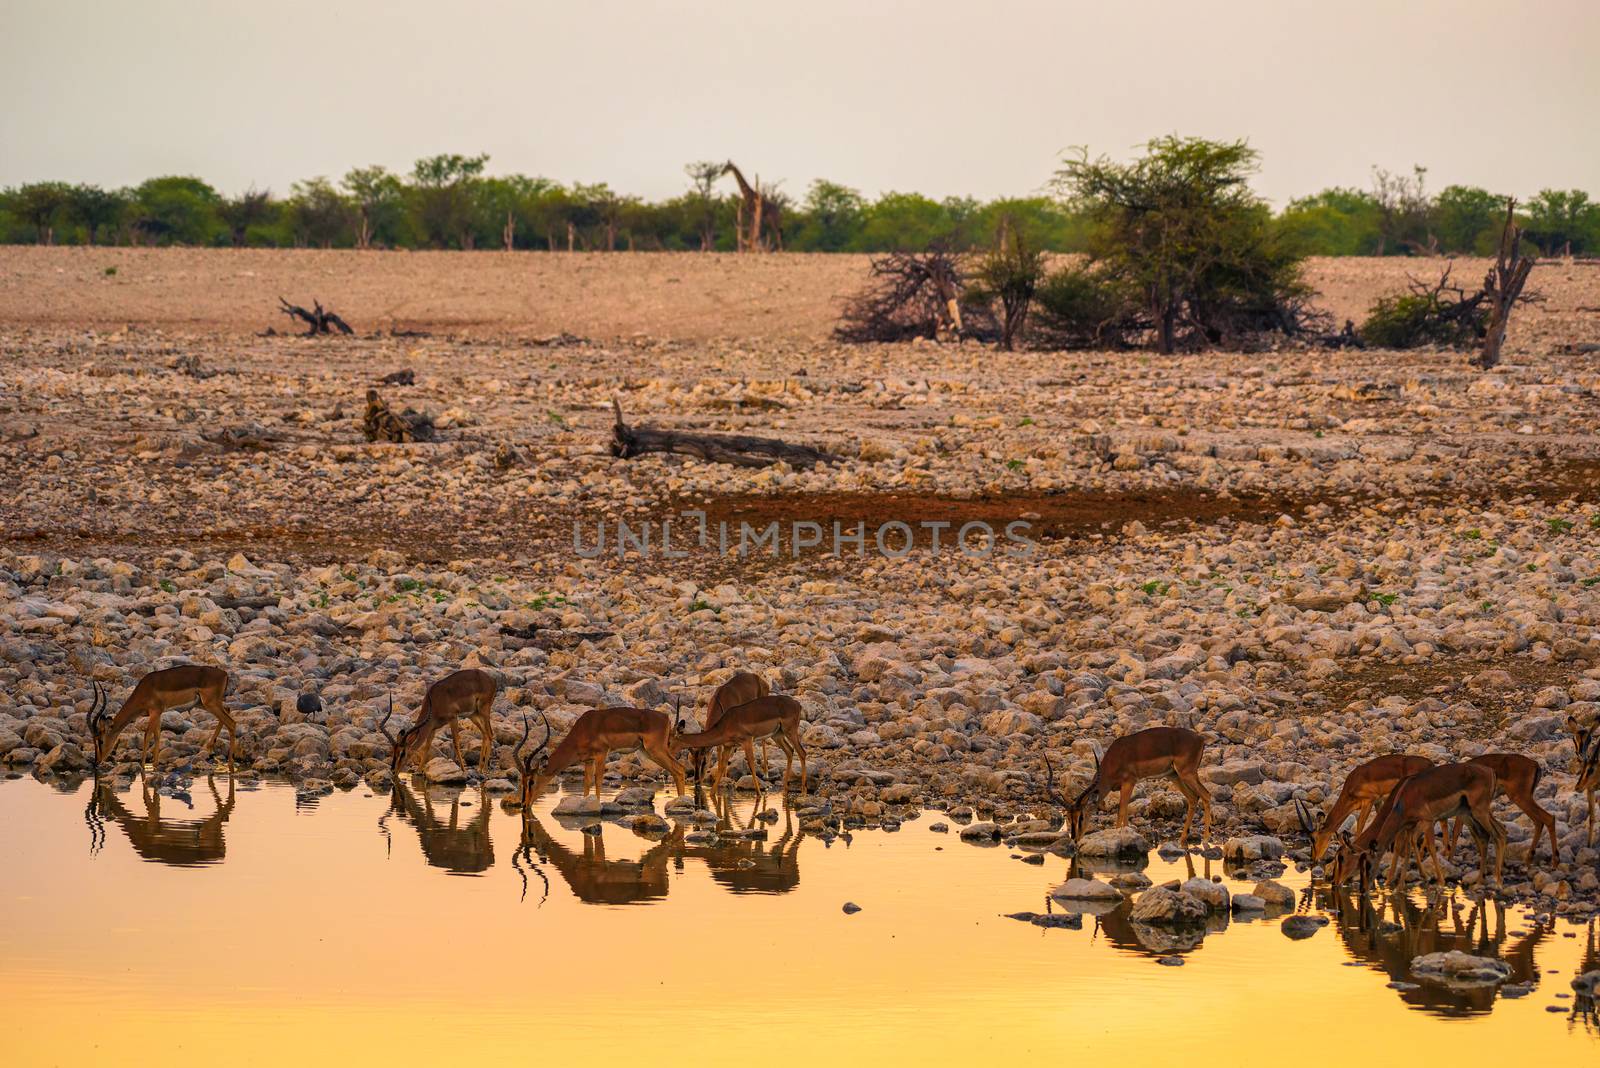 Herd of antelopes drinking water in Etosha National Park, Namibia by nickfox